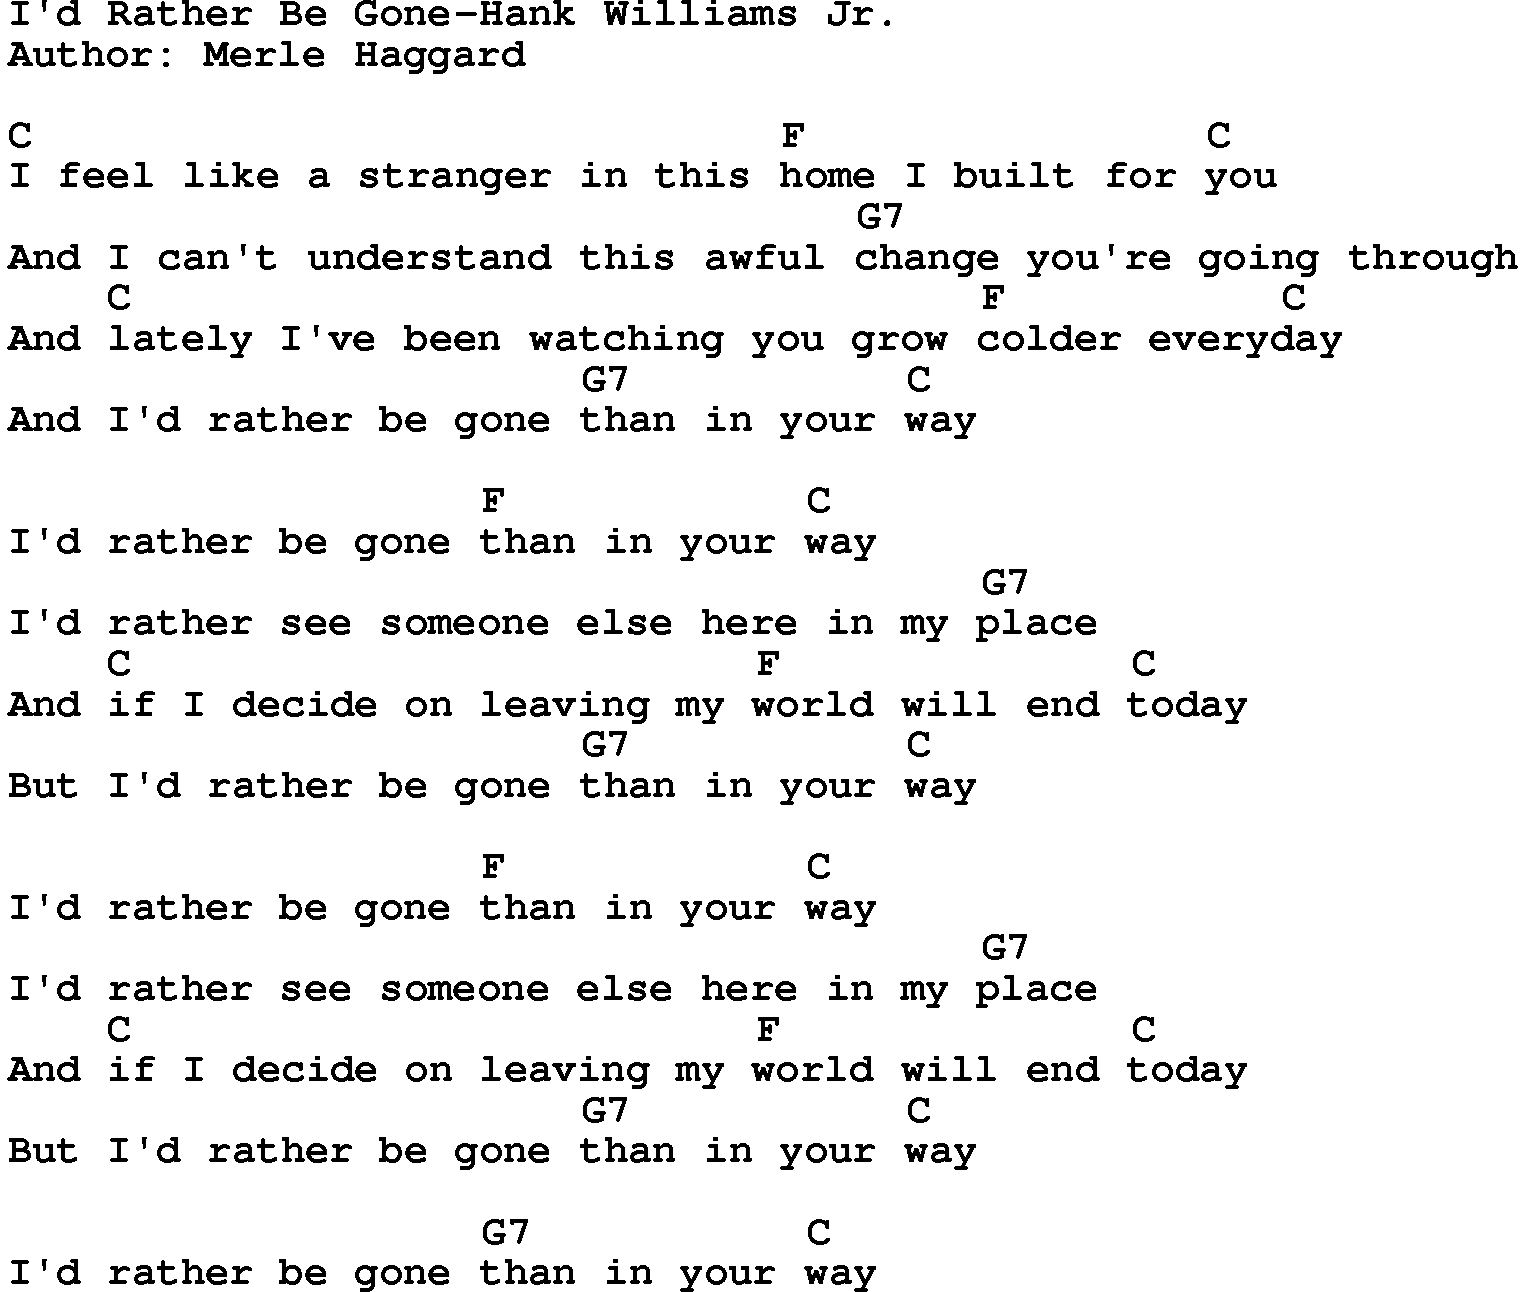 Country music song: I'd Rather Be Gone-Hank Williams Jr lyrics and chords